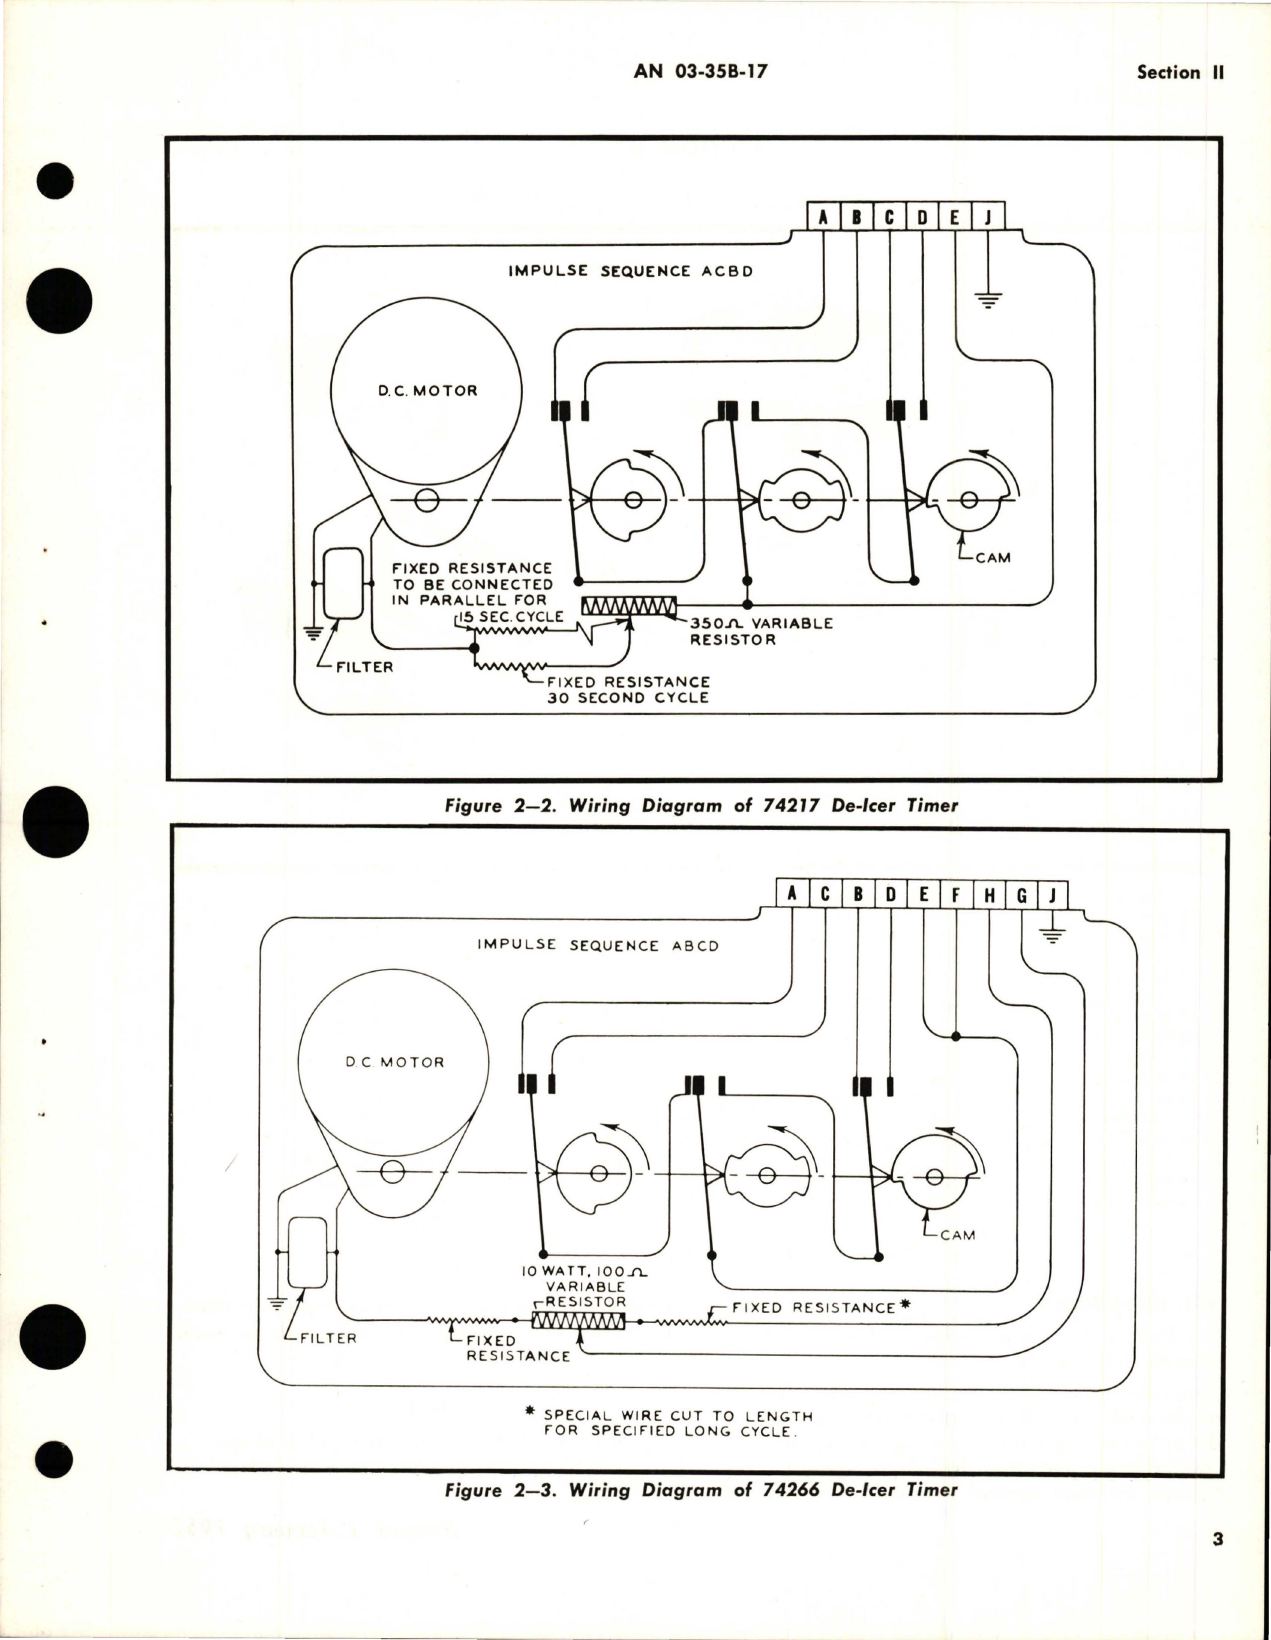 Sample page 7 from AirCorps Library document: Overhaul Instructions for De-Icer Timers - Models 74217, 74266, 556989, 556990, and 556991                                                                                                              